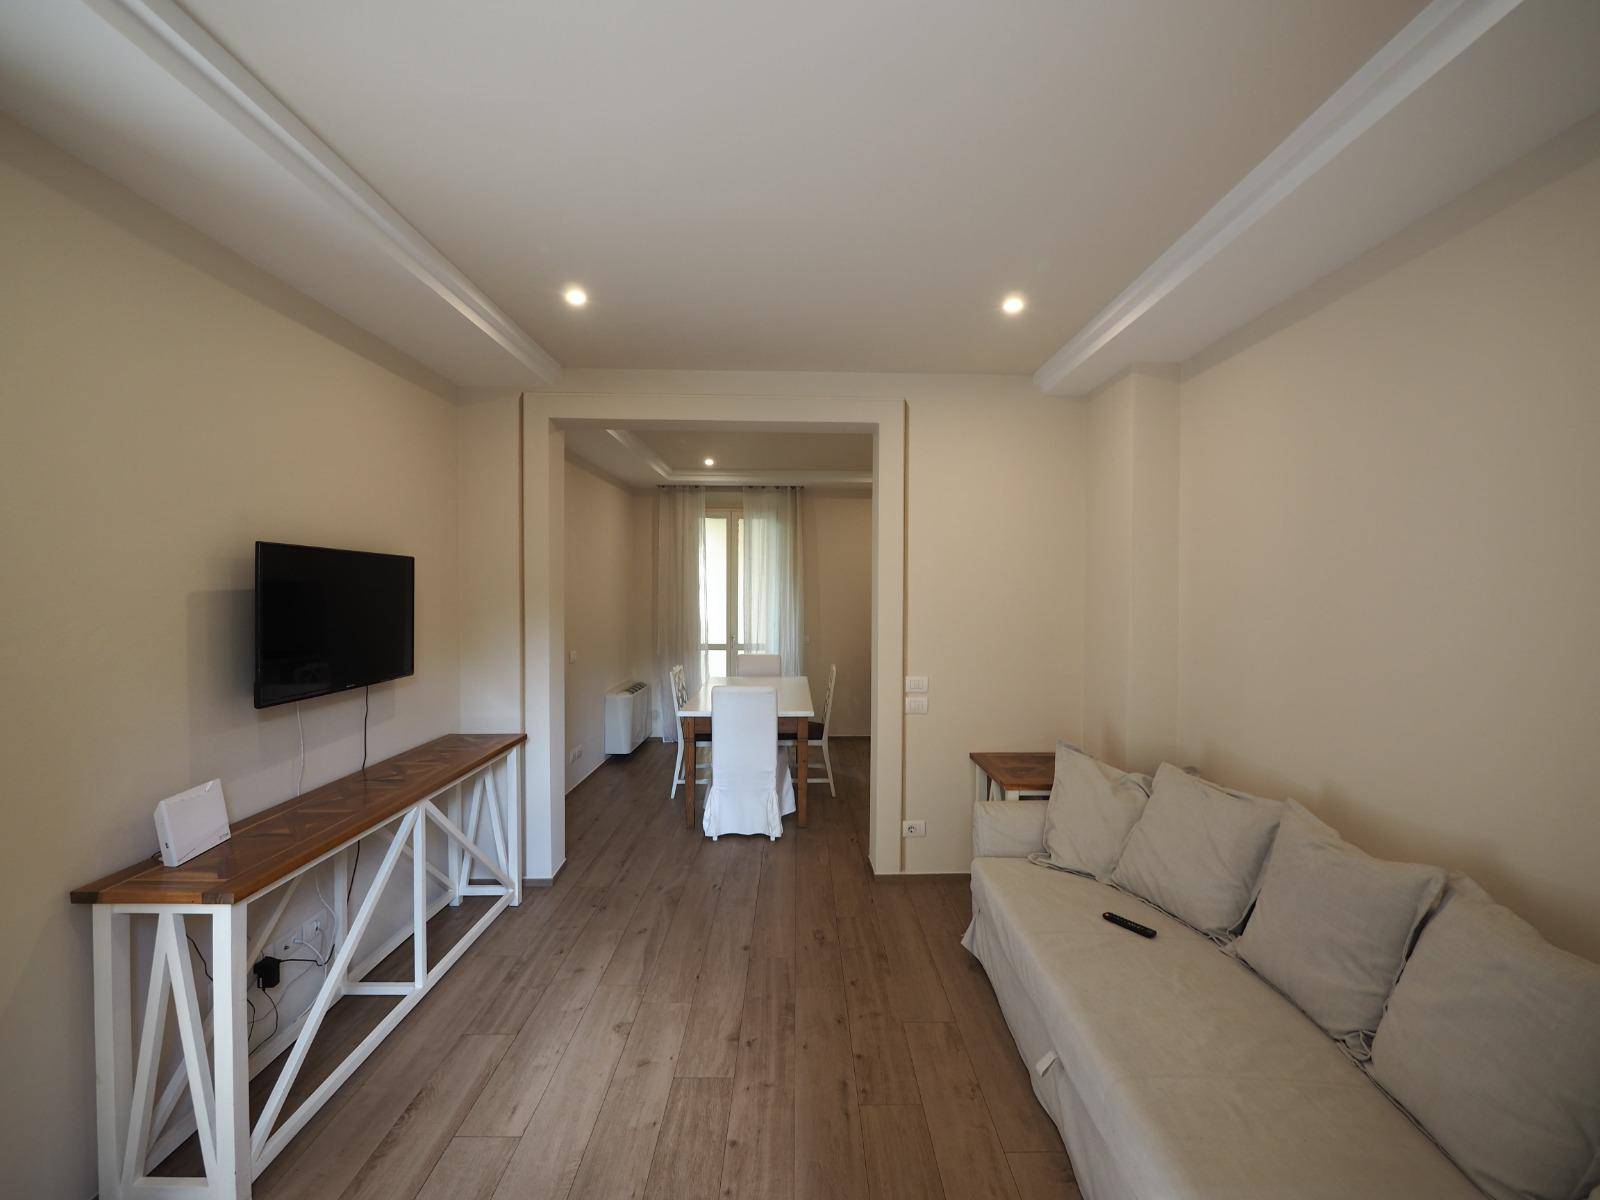 OBERDAN, FIRENZE, Apartment for rent of 80 Sq. mt., Heating Individual heating system, Energetic class: G, Epi: 175 kwh/m2 year, placed at Ground, 